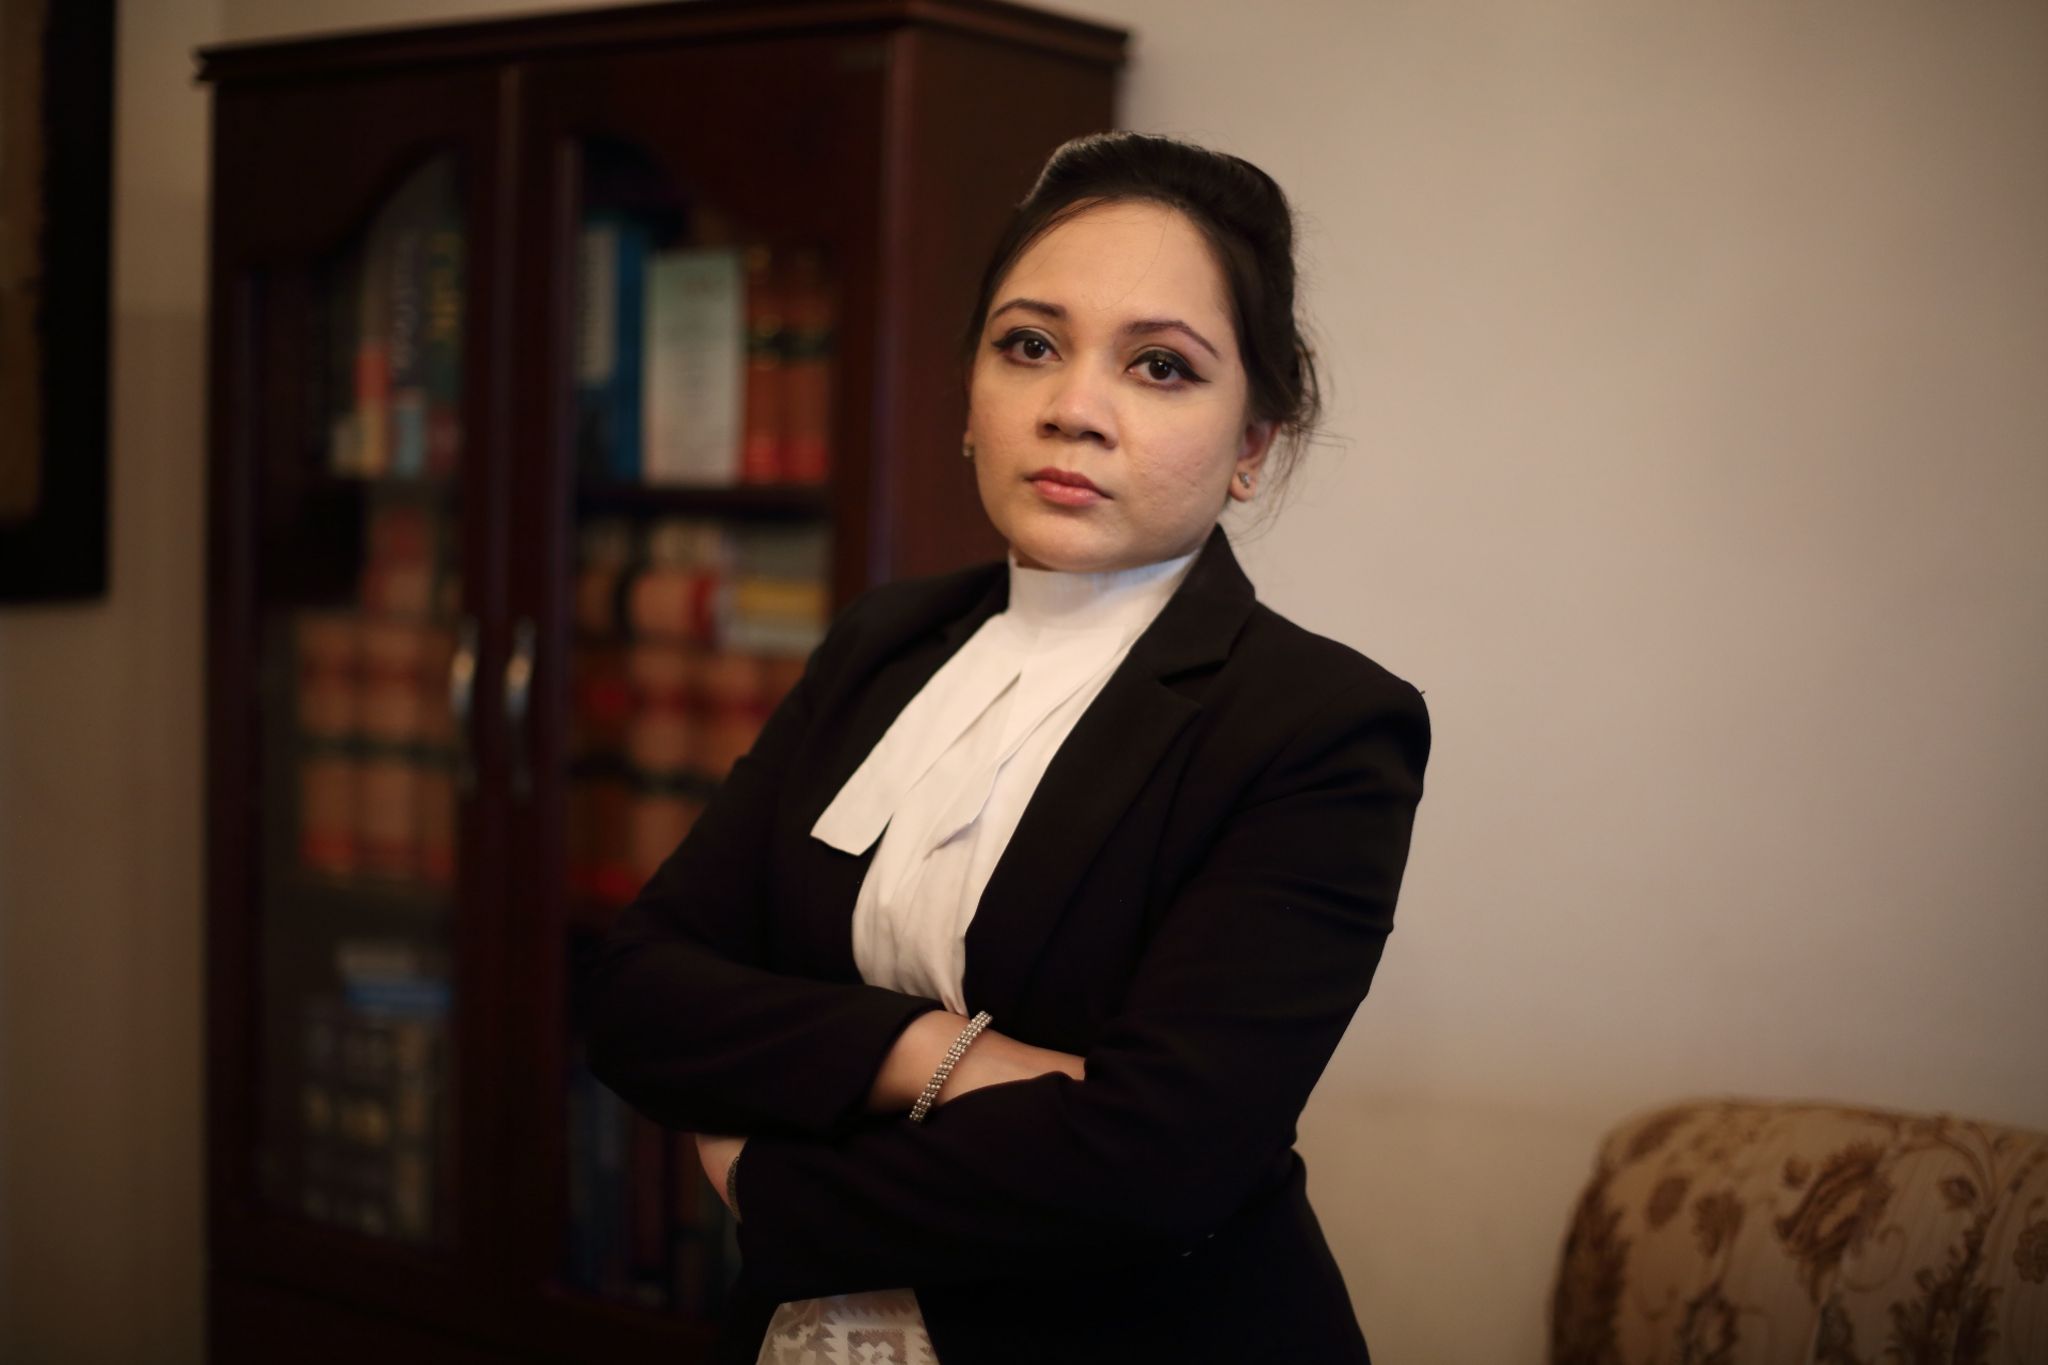 Shagufta Ahmed in a legal suit